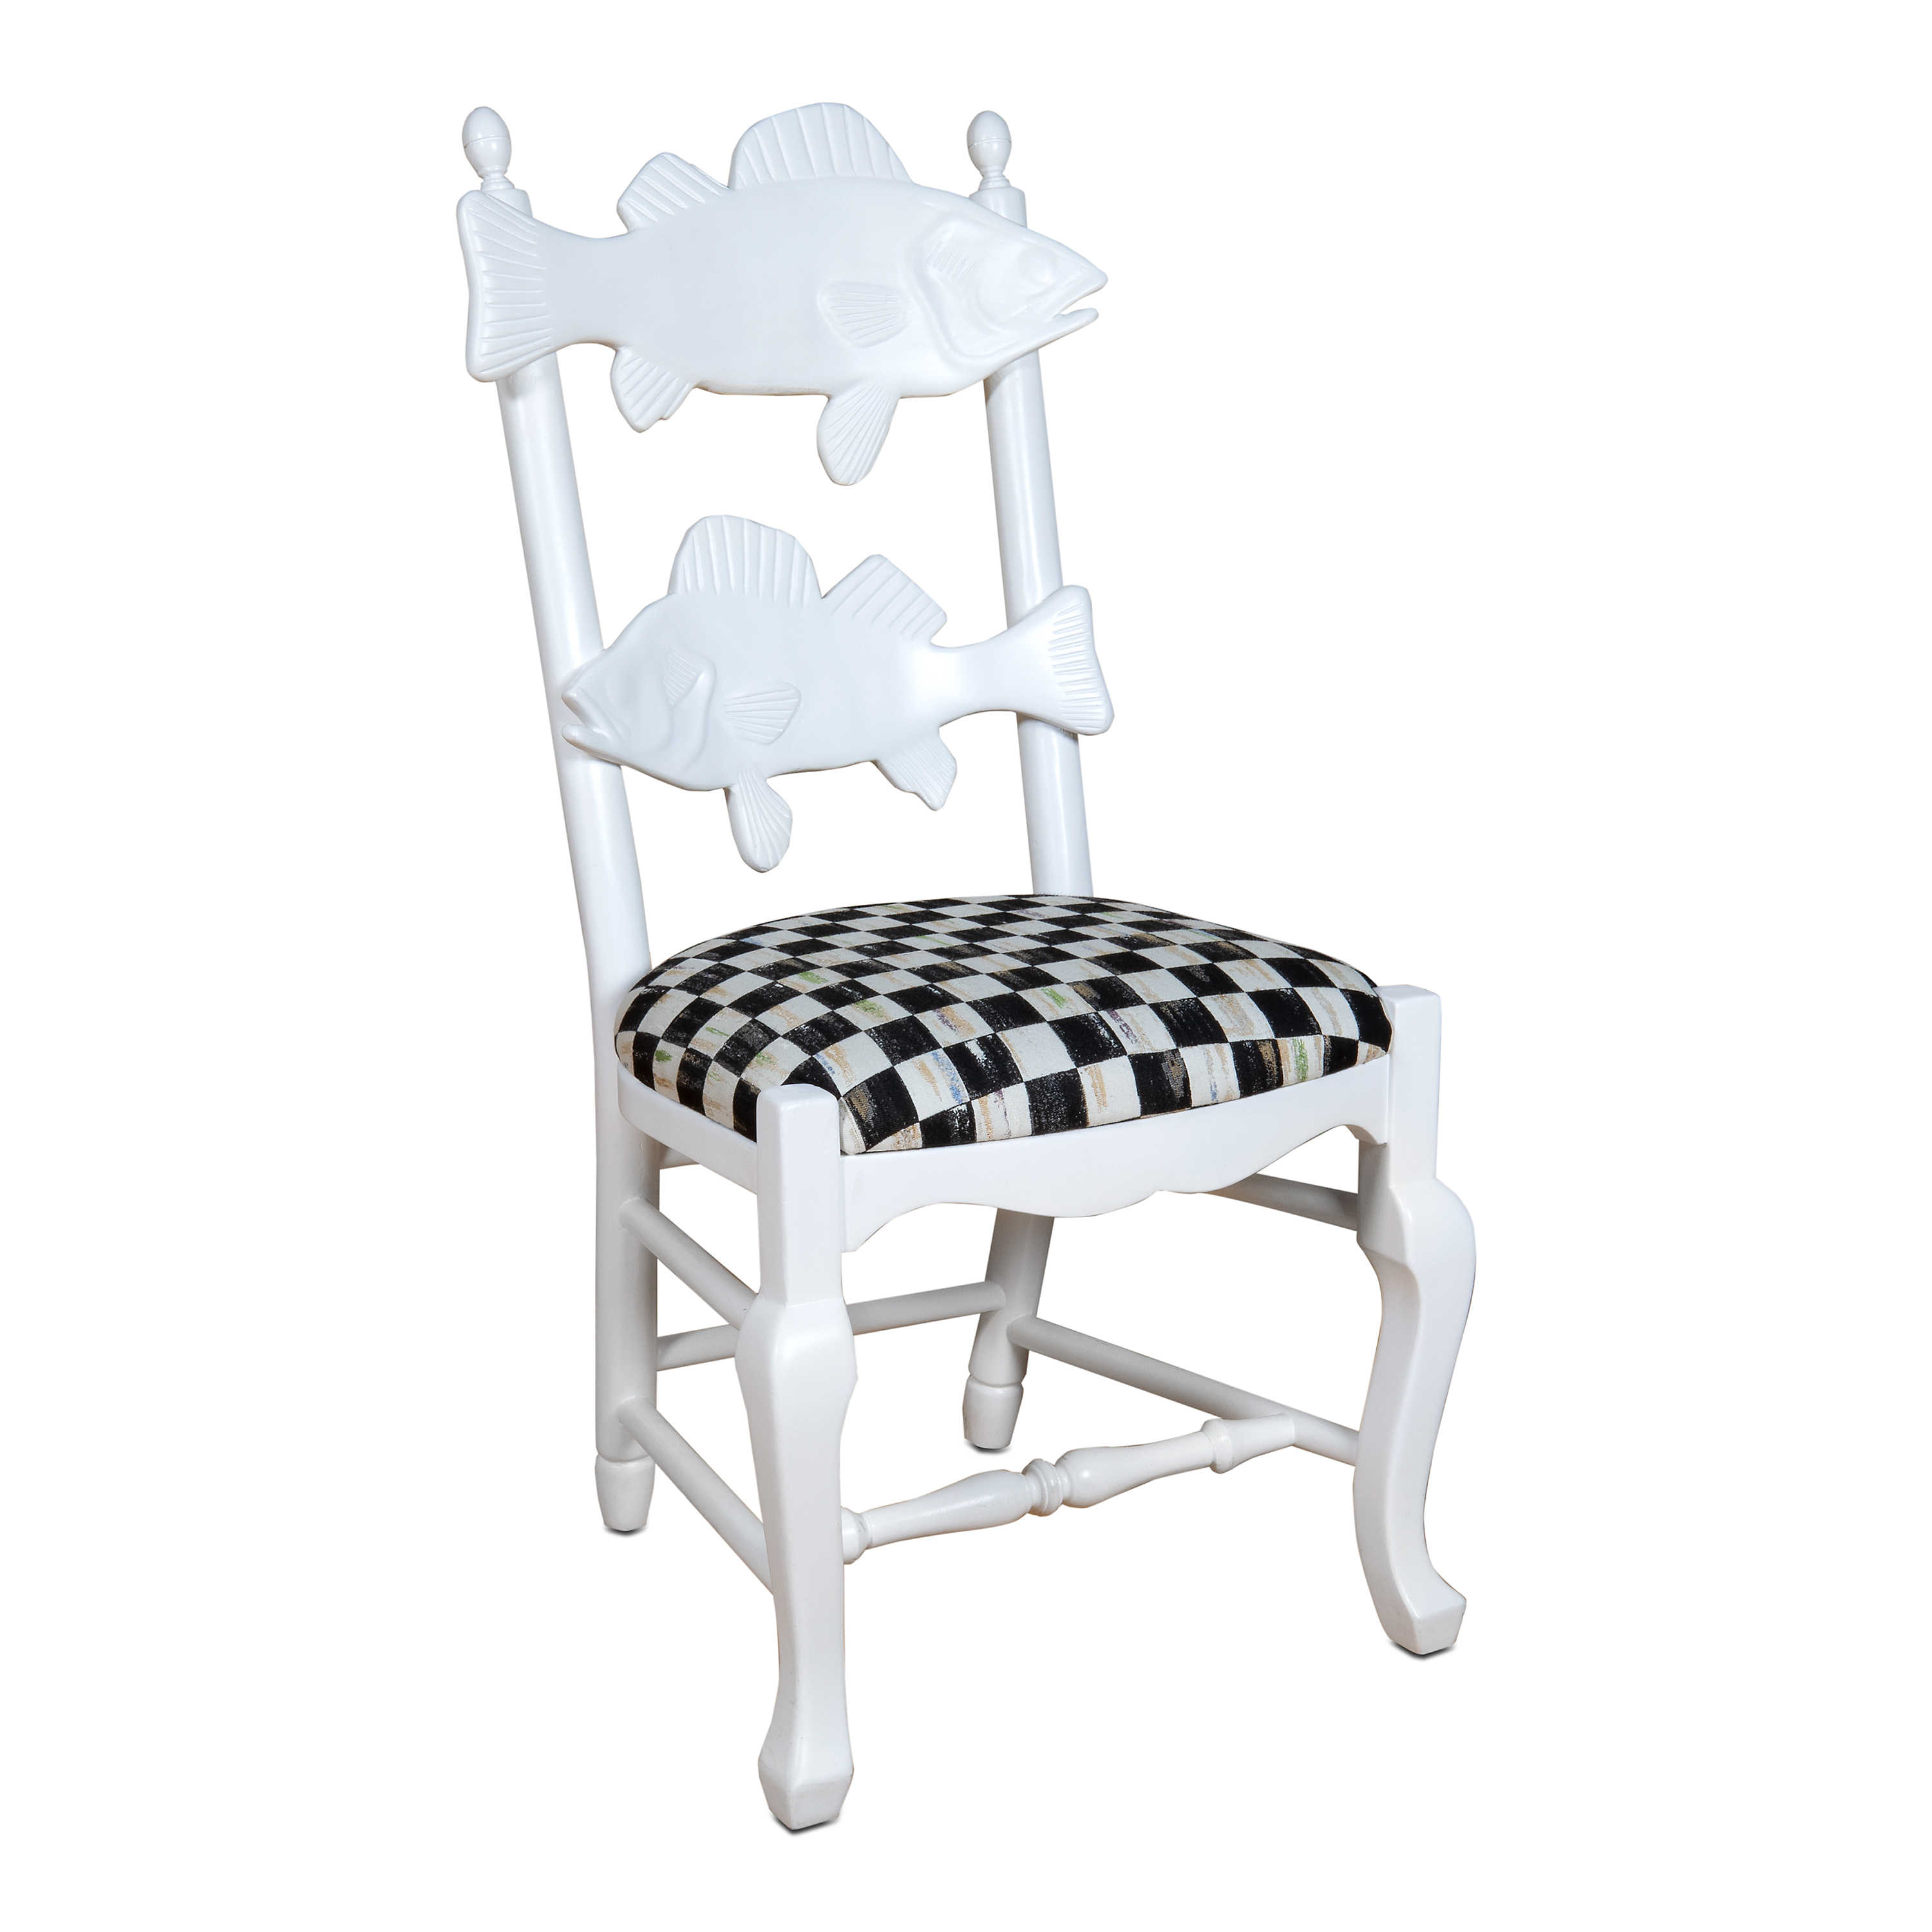 Courtly Check Outdoor Fish Chair mackenzie-childs Panama 0